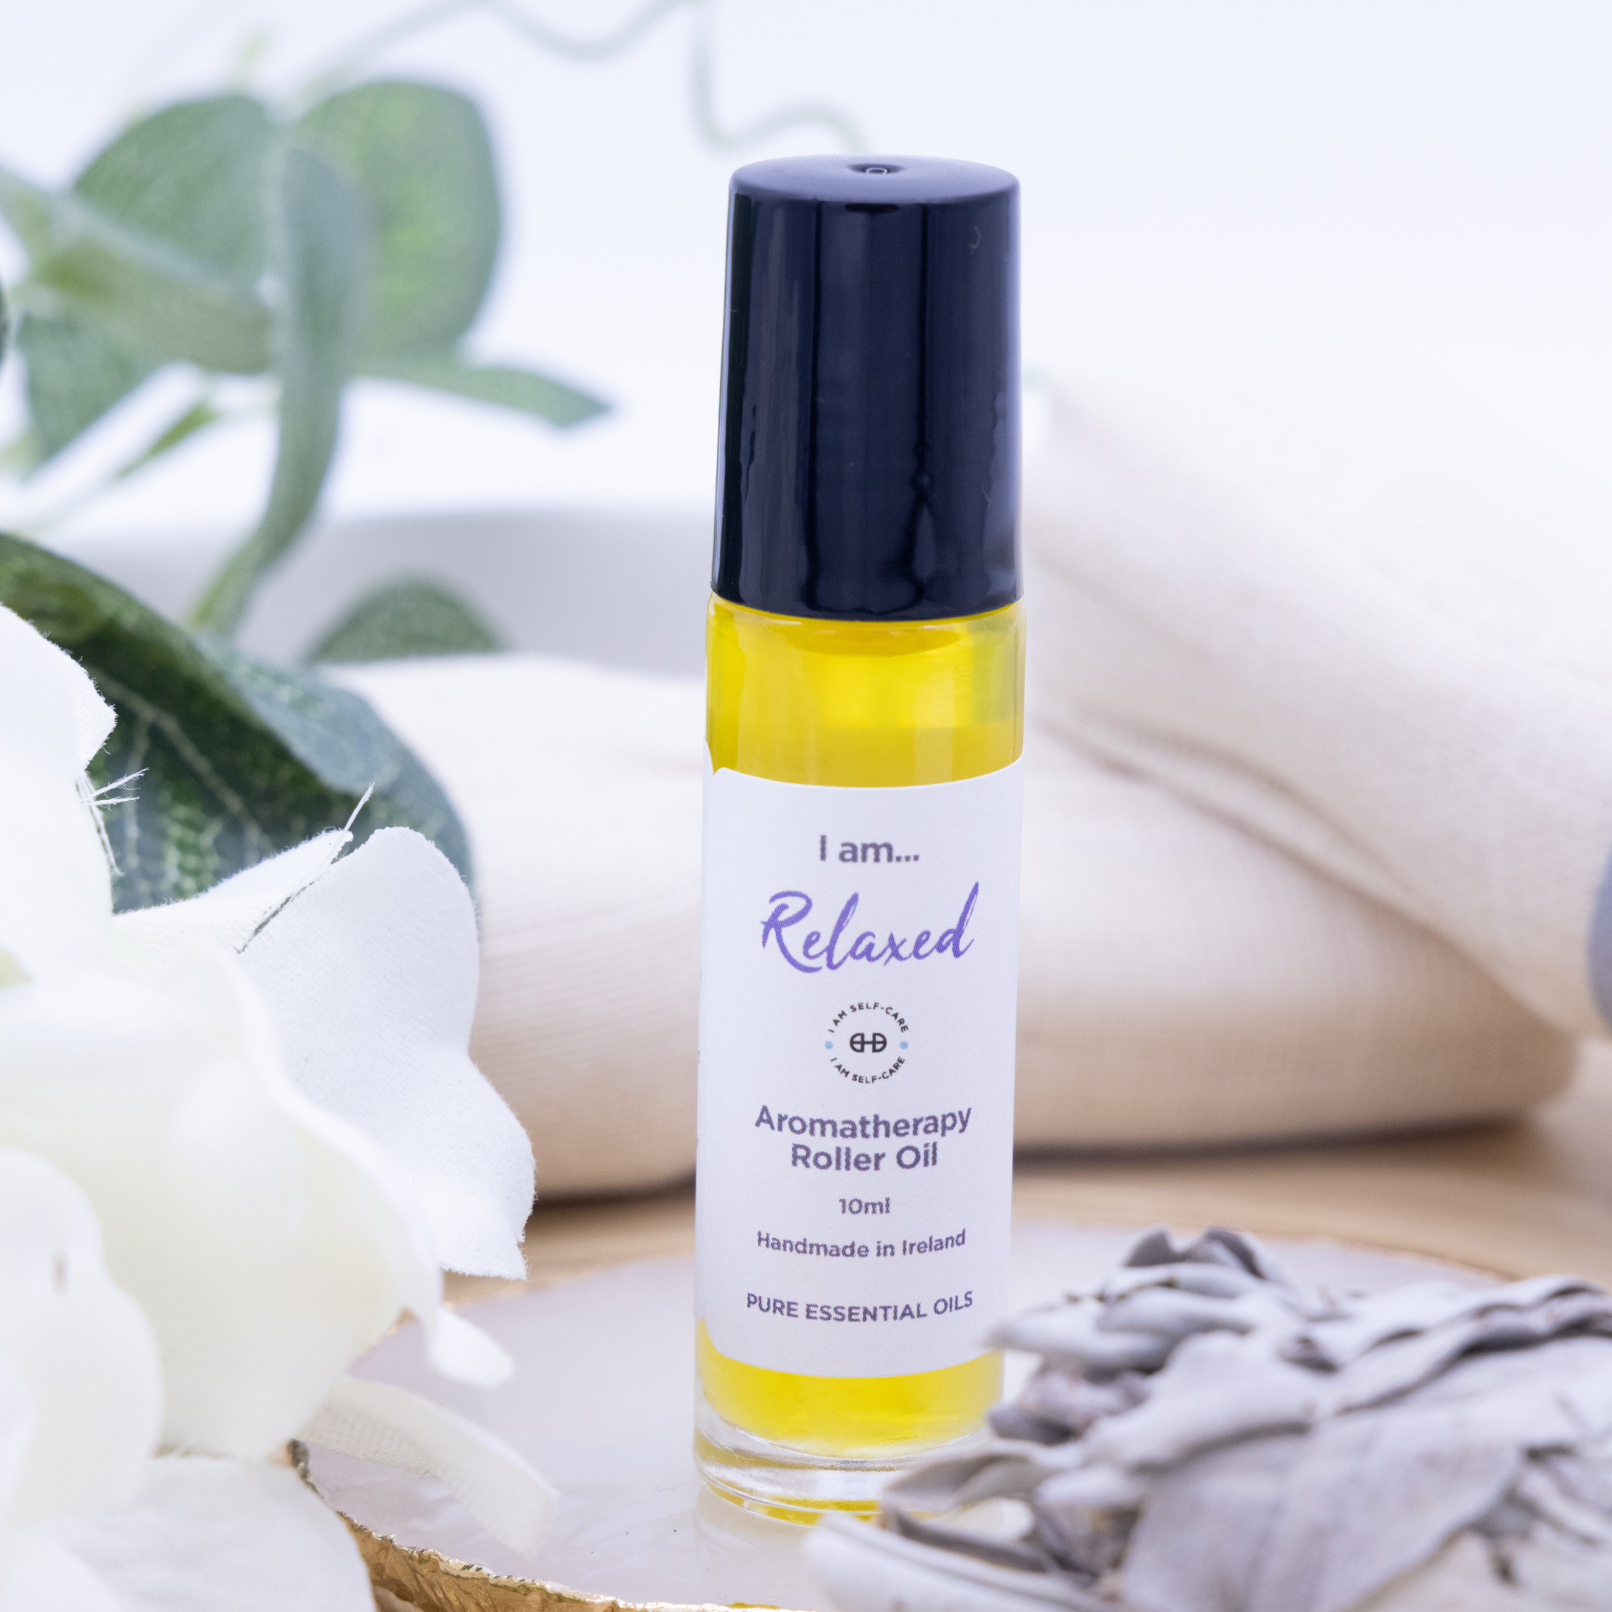 I am... Relaxed Aromatherapy Roller Oil